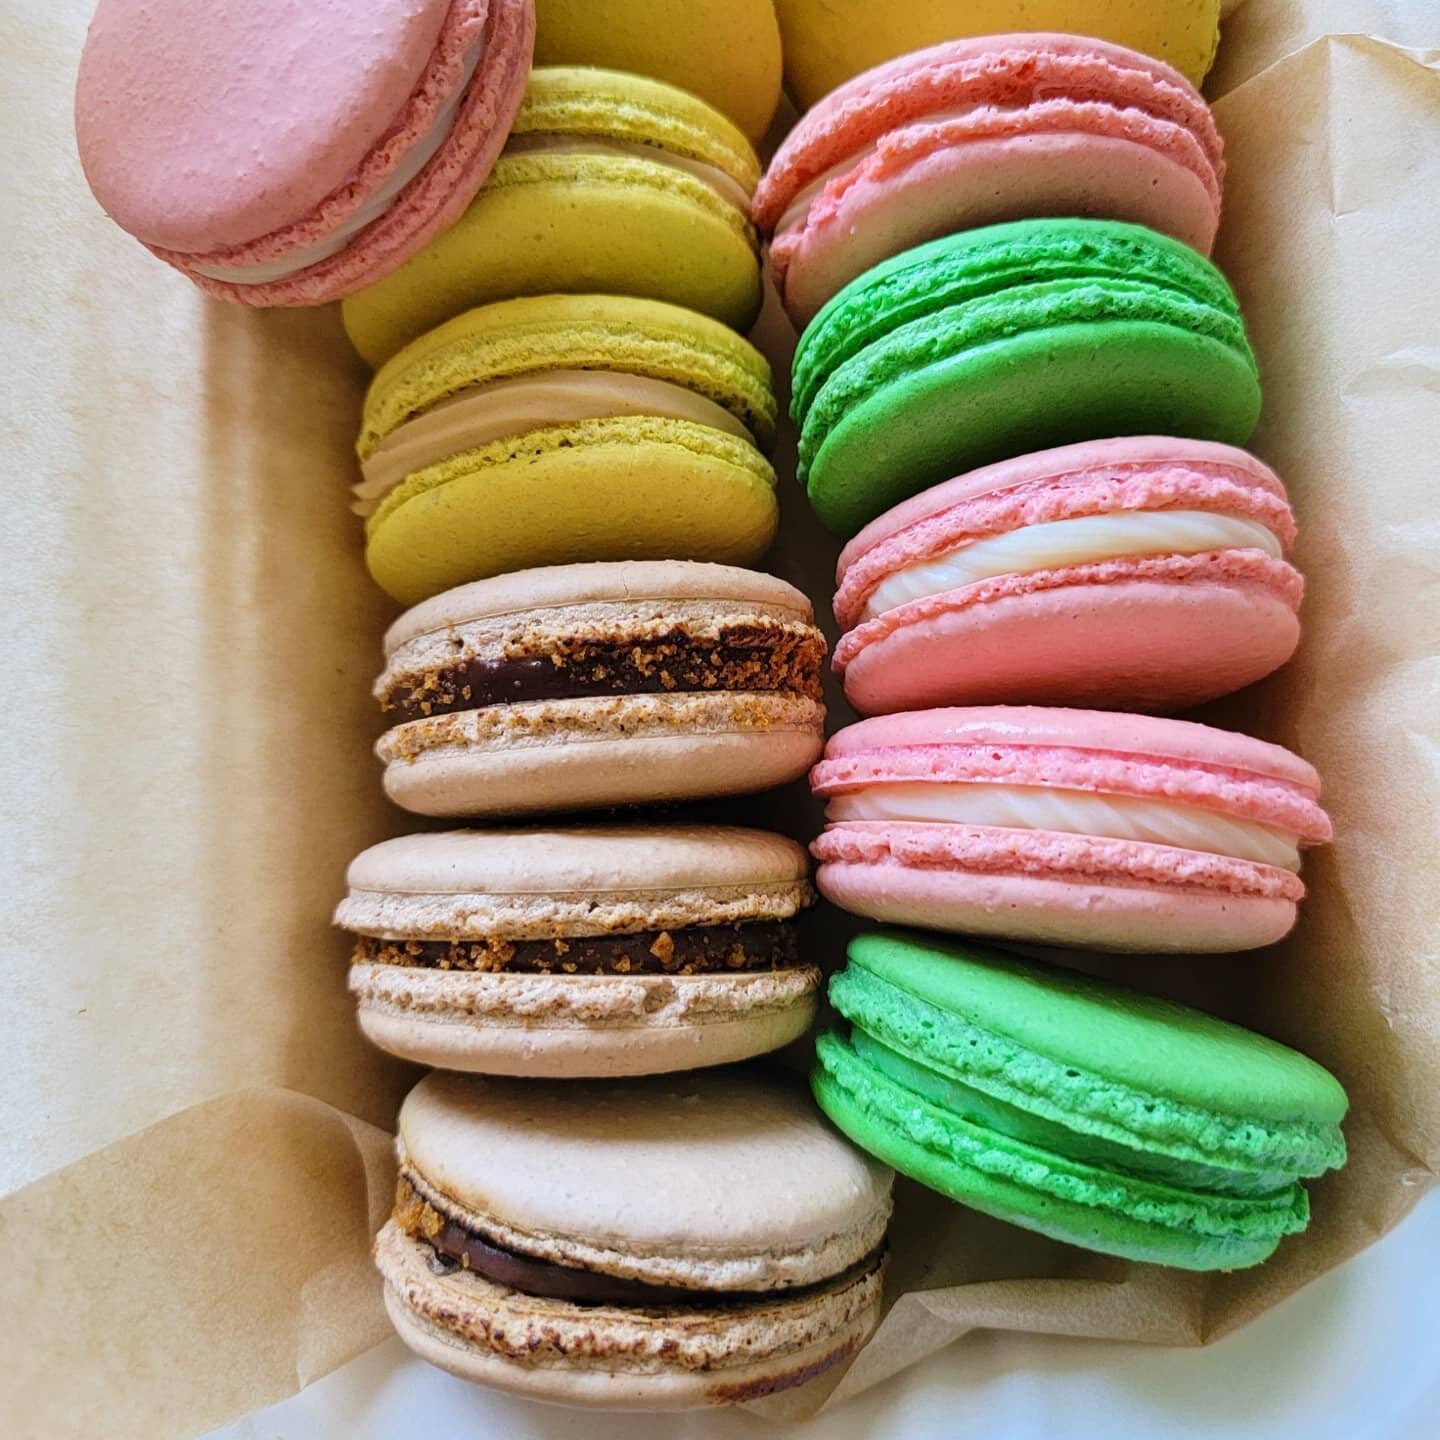 Dad's day treat boxes are available for preorder! 🥸 Pickup this Saturday 6/19 between 11am-1pm! The box includes two macarons: banana milk &amp; mango lime. Available for preorder until Thursday 6/19 or sold out! Link in bio~

Flavors shown are: smo